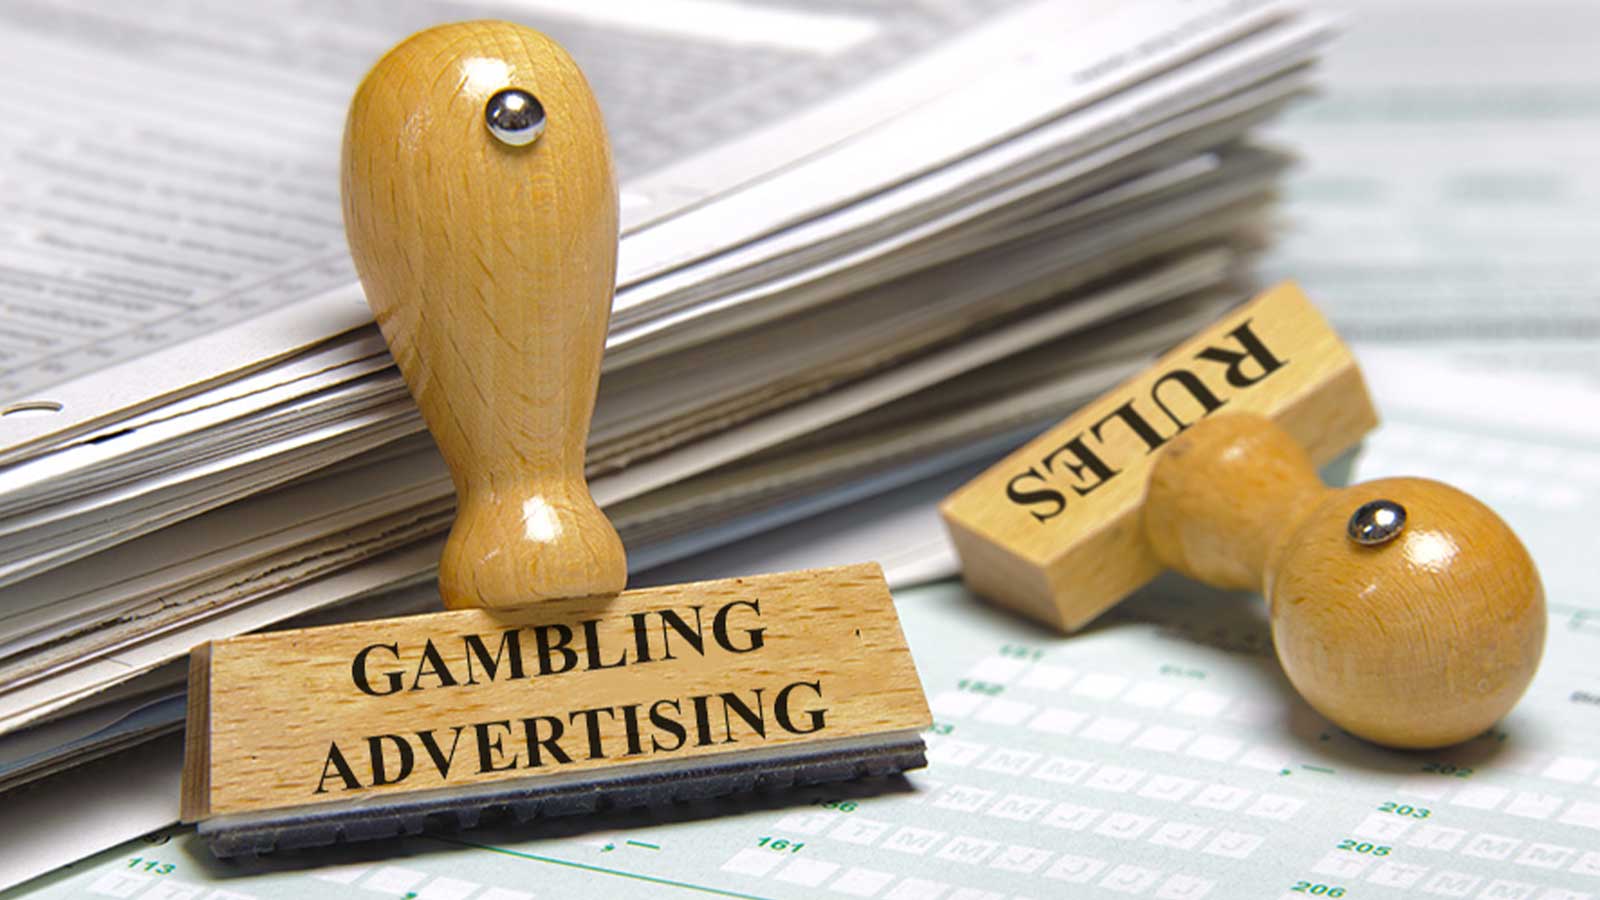 What Are the Current Gambling Advertising Rules in the UK